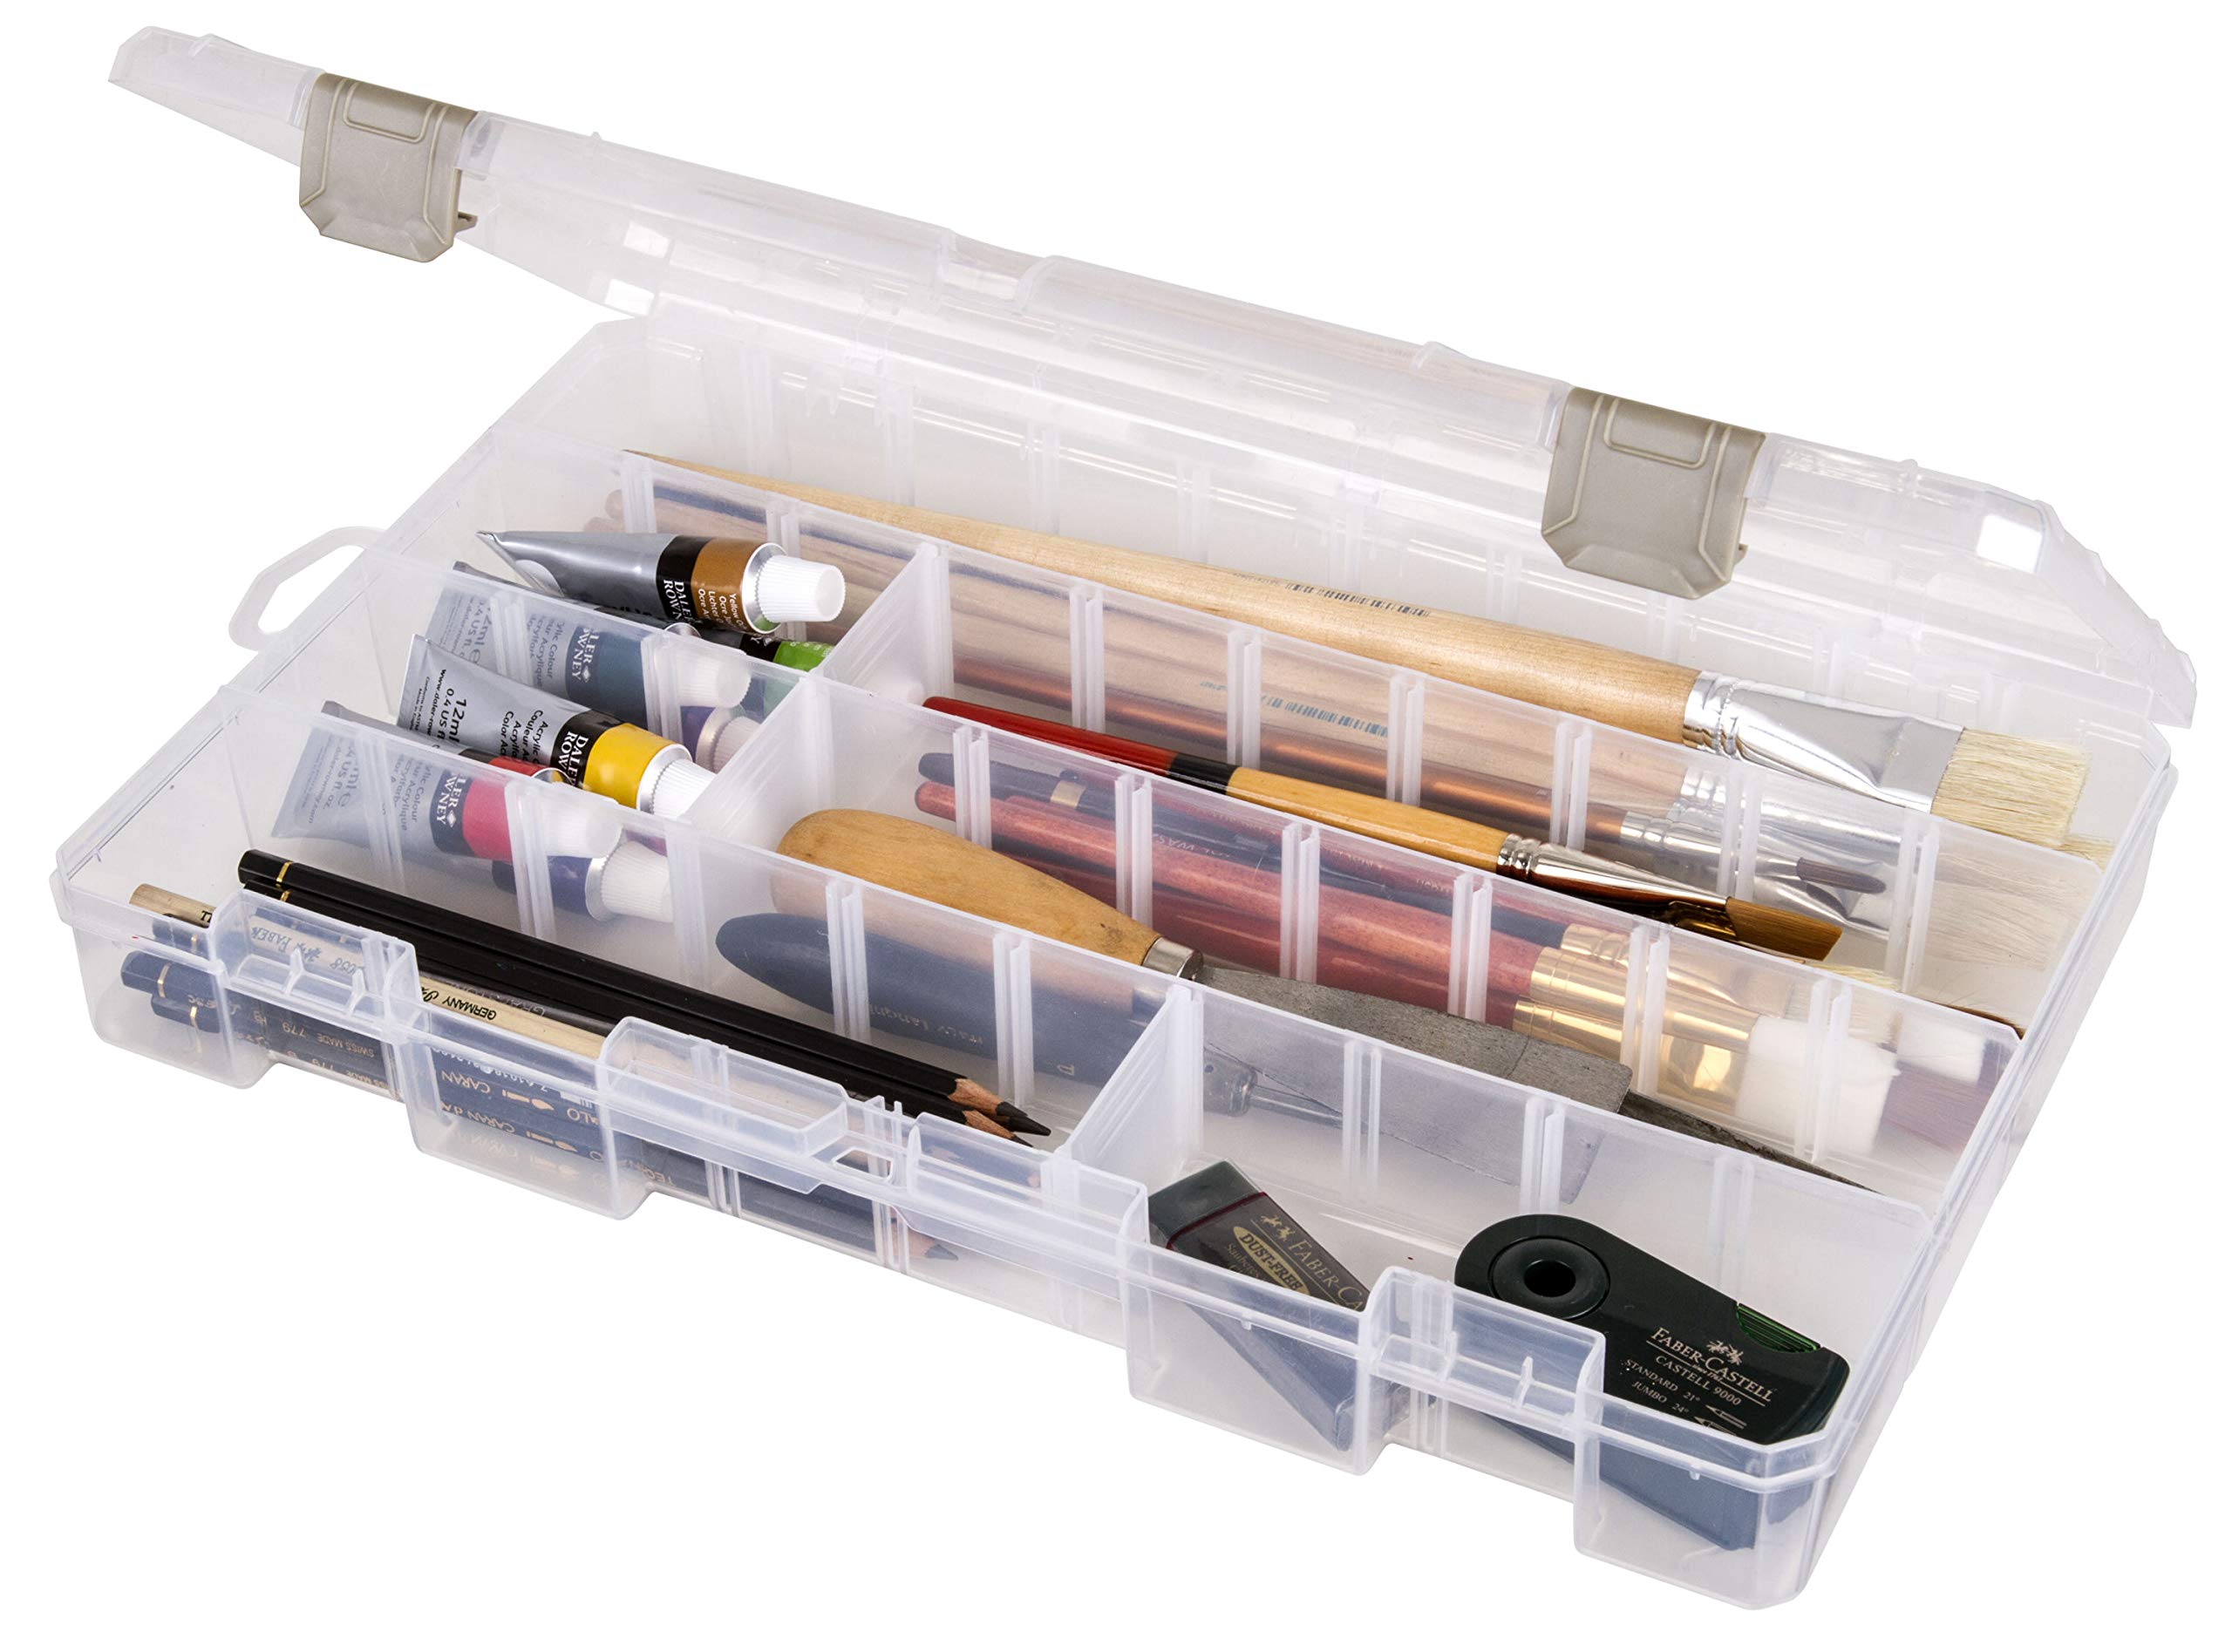 ArtBin 5004AB Large Solutions Box with Dividers, Art & Craft Organizer, [1] Plastic Storage Case, Clear